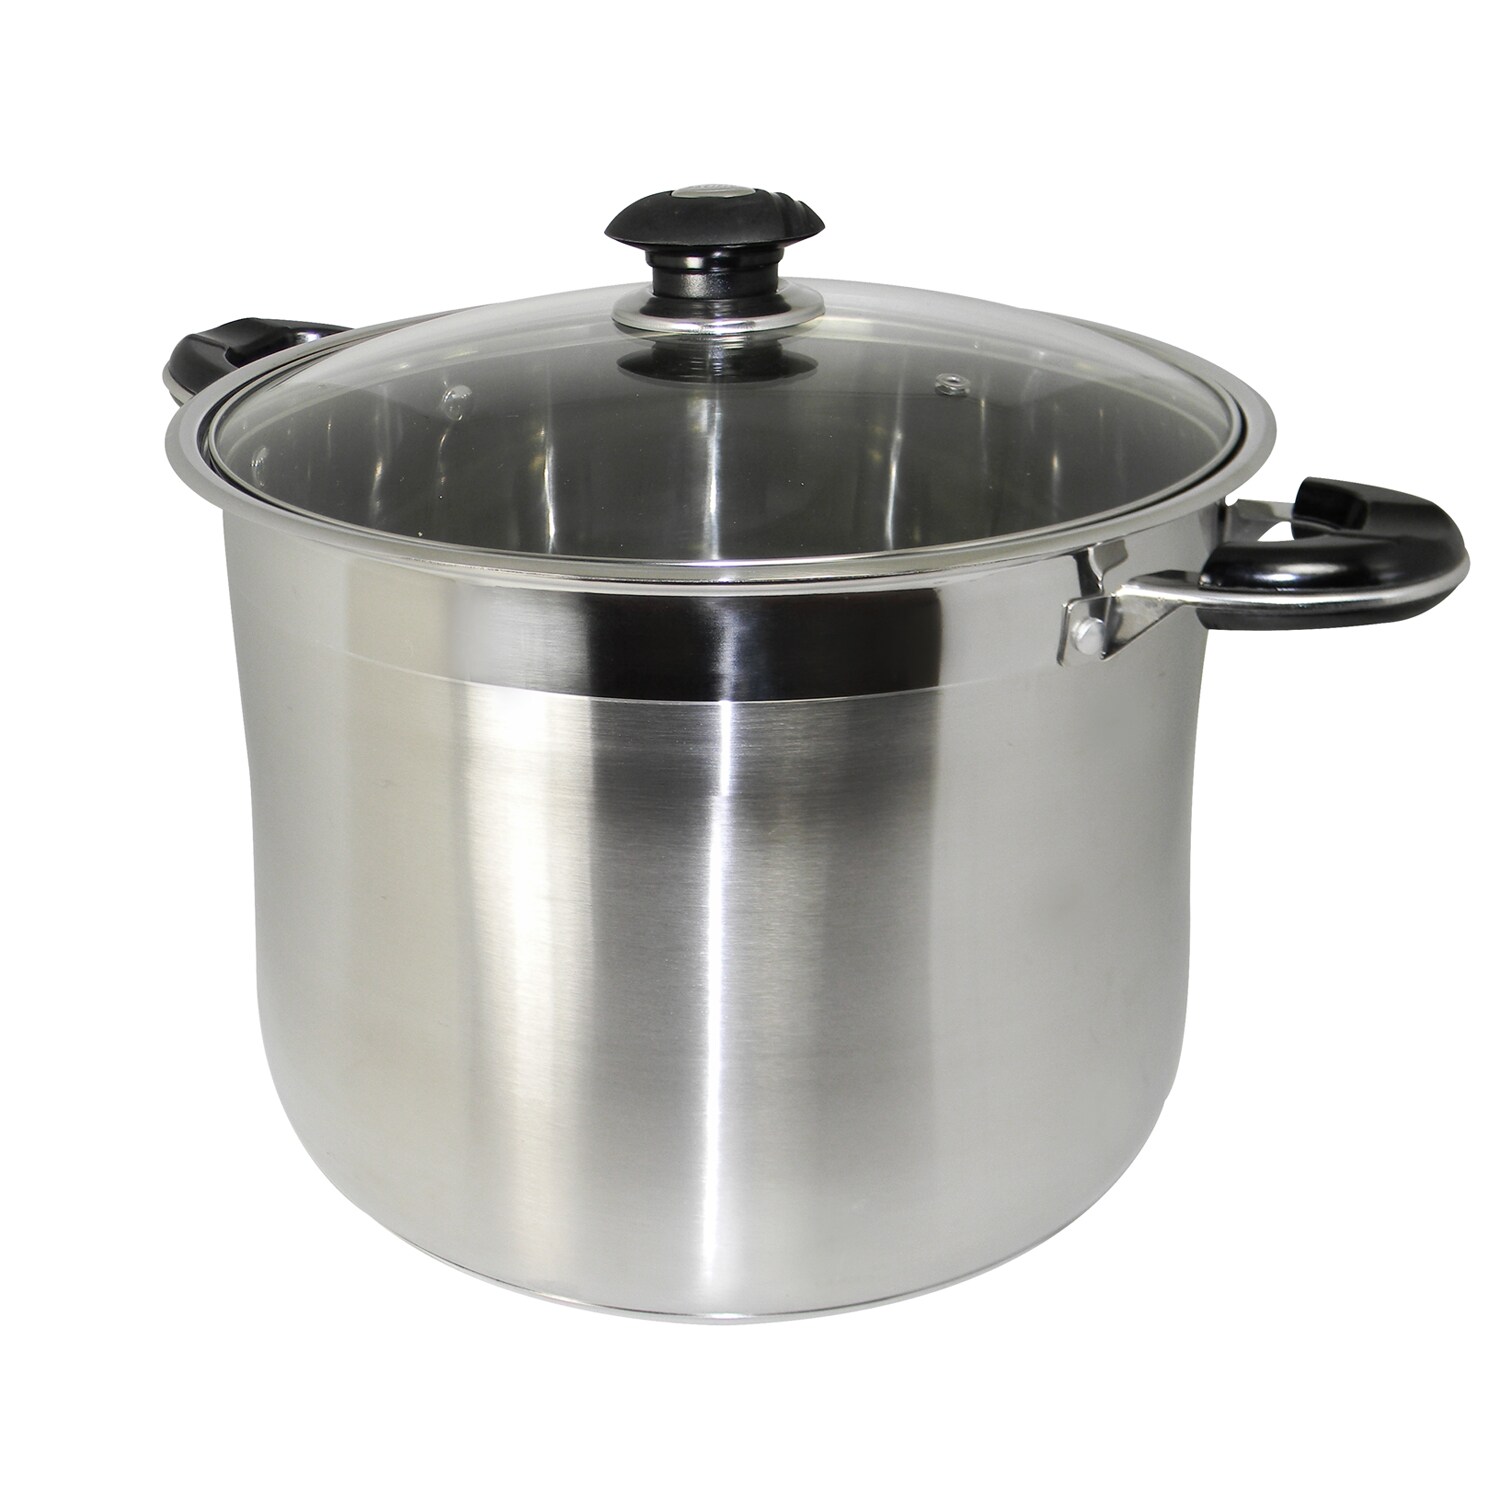 https://ak1.ostkcdn.com/images/products/8060317/Concord-Heavy-duty-18-10-Stainless-Steel-Gourmet-Tri-Ply-24-quart-Stockpot-L15416837.jpg